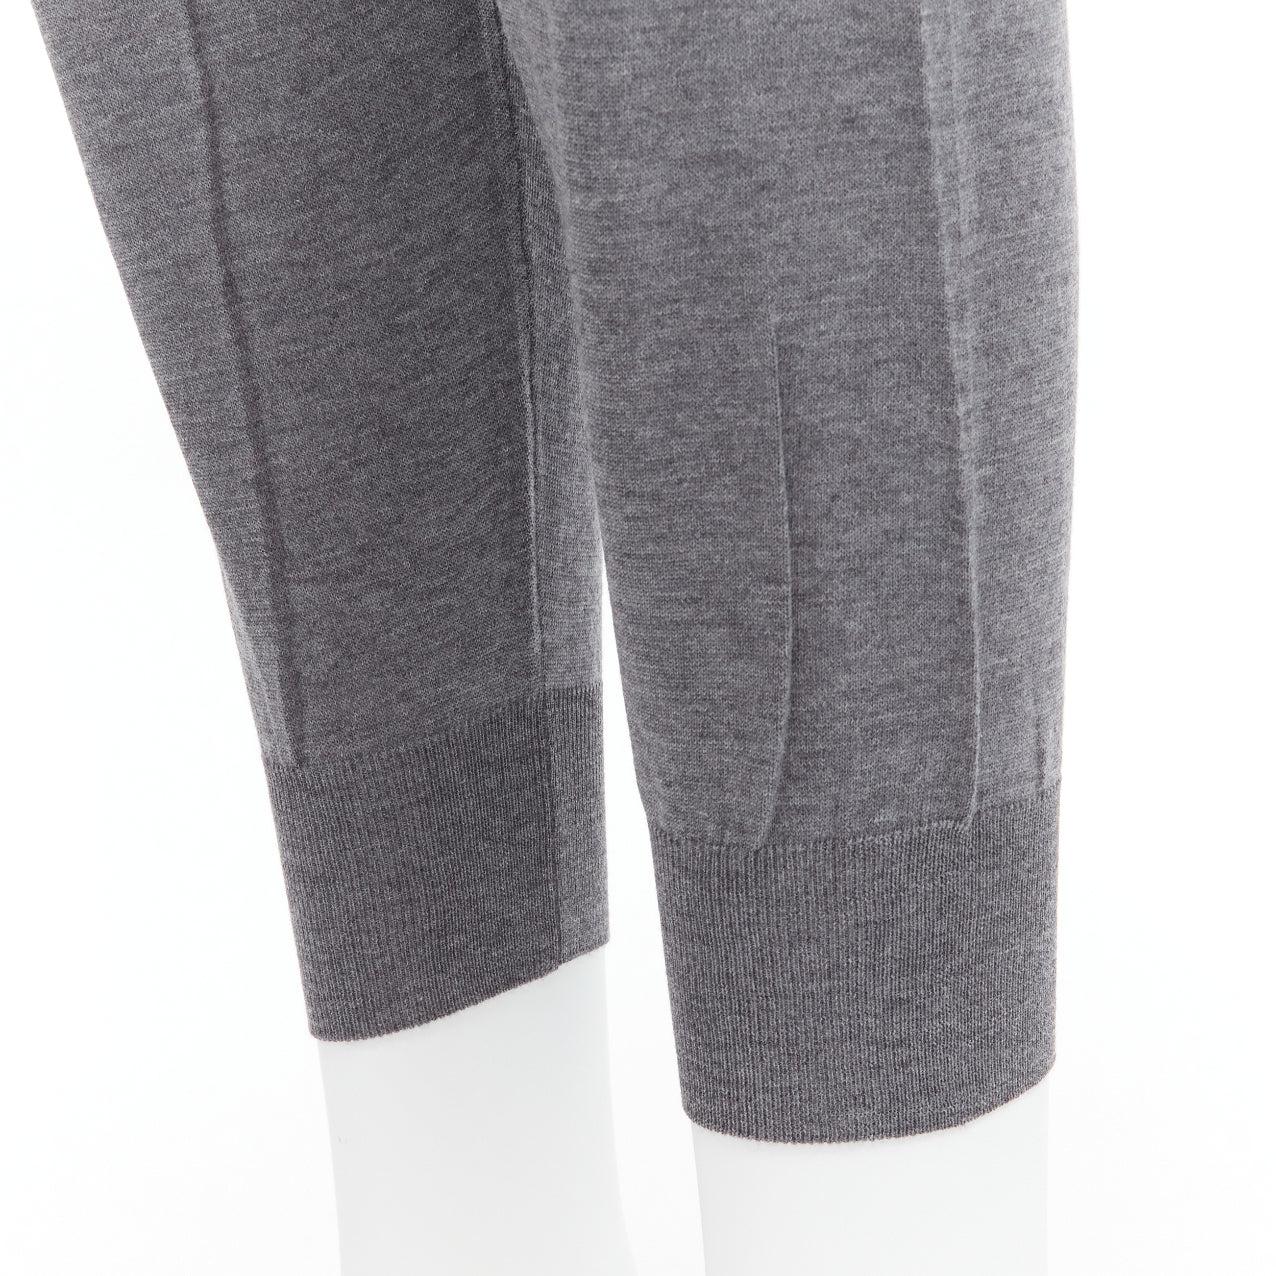 STELLA MCCARTNEY 2016 grey wool blend mid waist casual cropped tapered knitted pants IT36 XXS
Reference: SNKO/A00296
Brand: Stella McCartney
Material: Wool, Blend
Color: Grey
Pattern: Solid
Closure: Elasticated
Made in: Italy

CONDITION:
Condition: